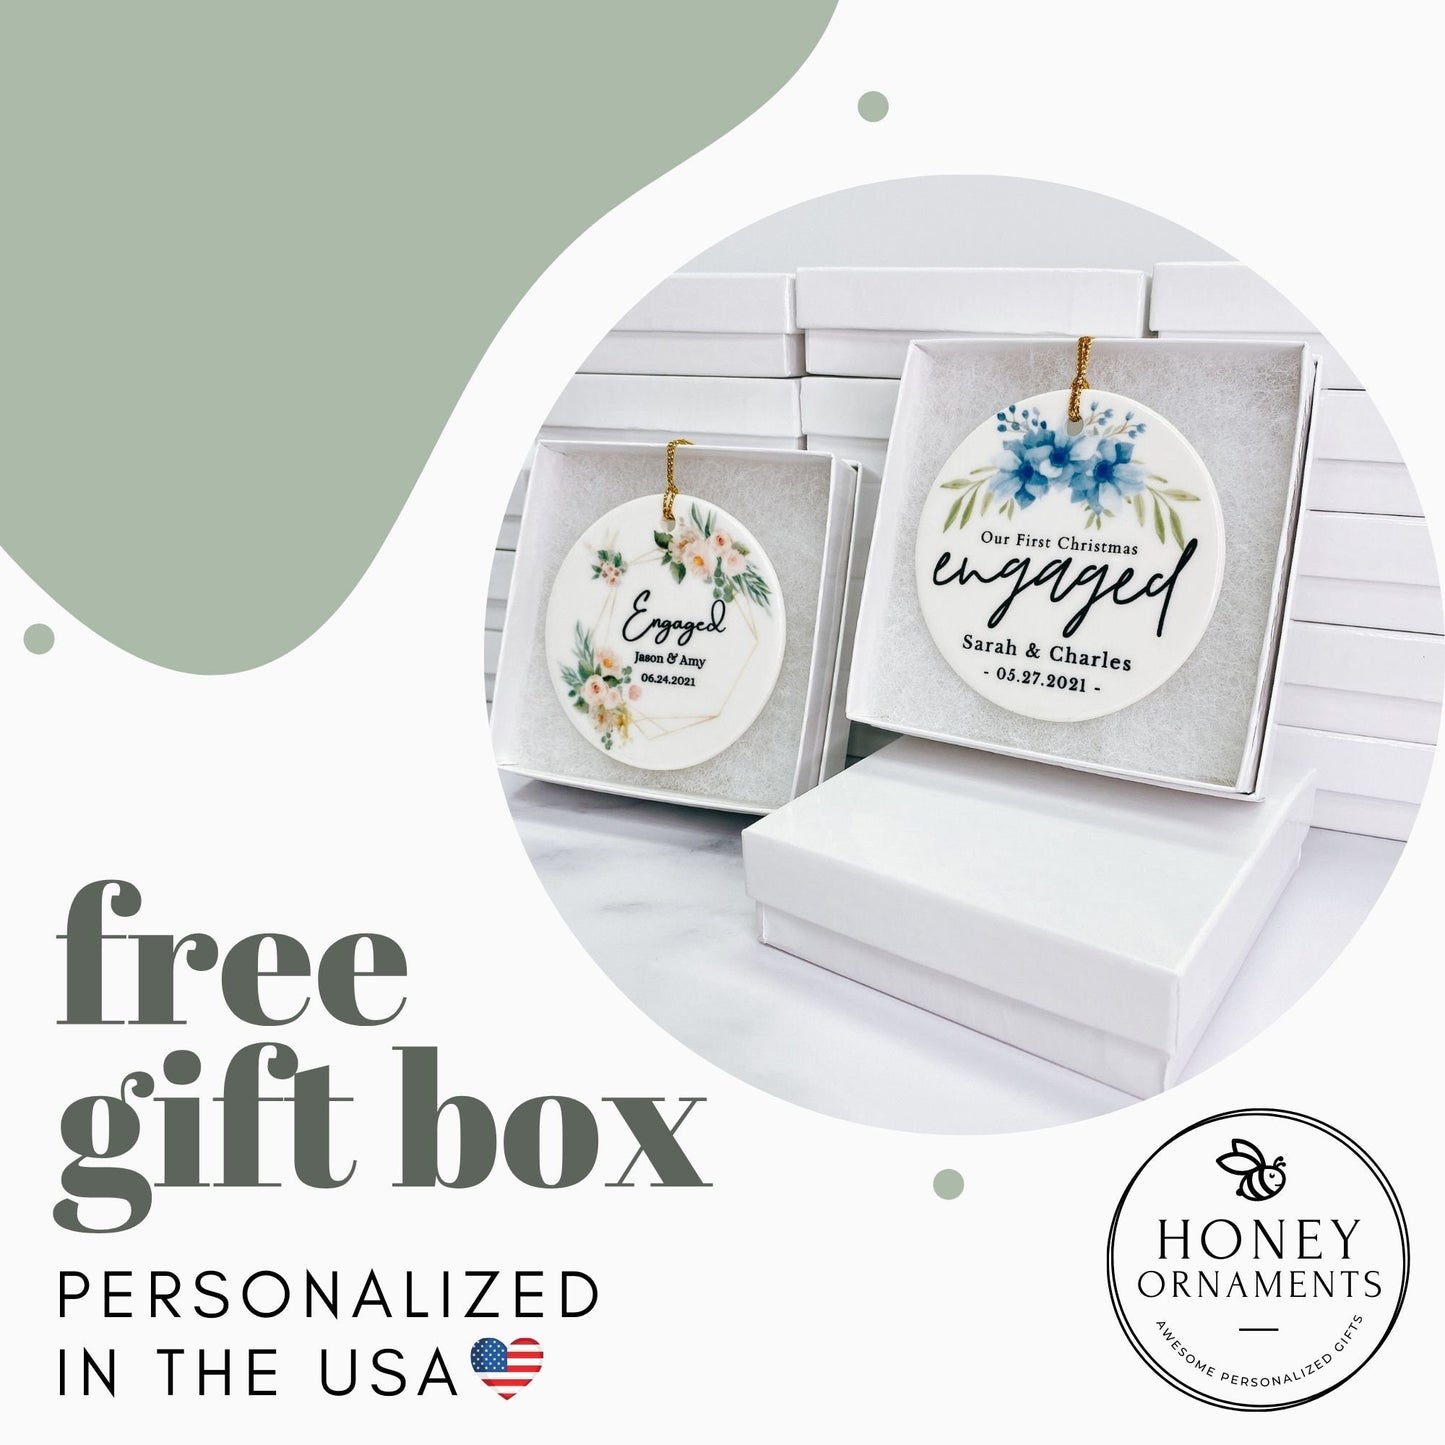 We Are Engaged, Engagement Ornament, Personalized Gift Ideas for Bride and Groom, First Christmas Engaged Ornament, Engagement Gift Box